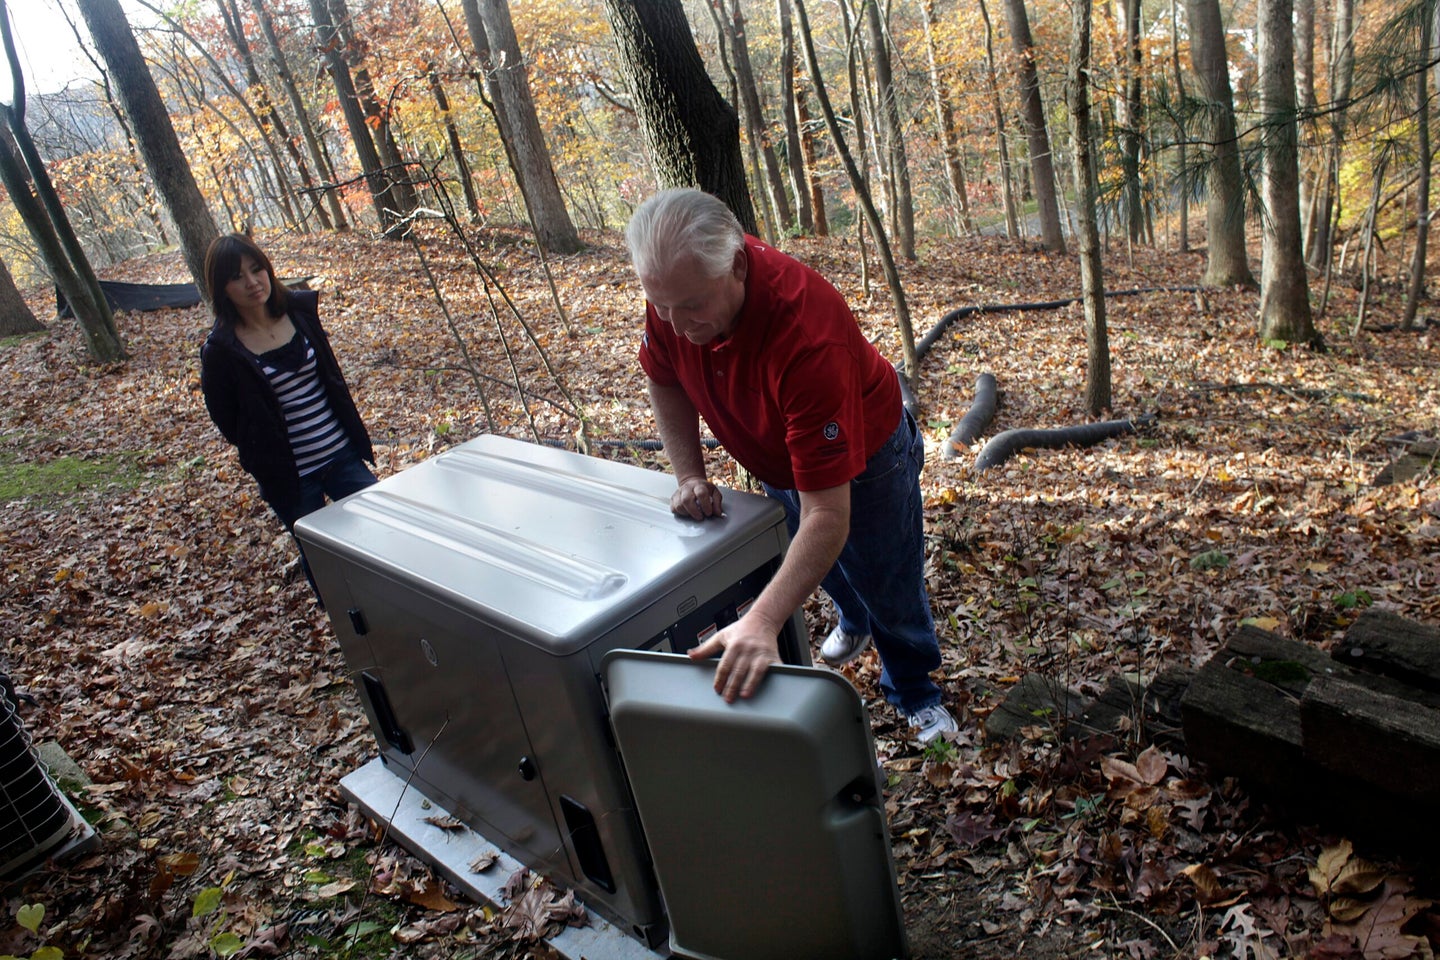 Two elderly people looking at a large grey generator in the woods